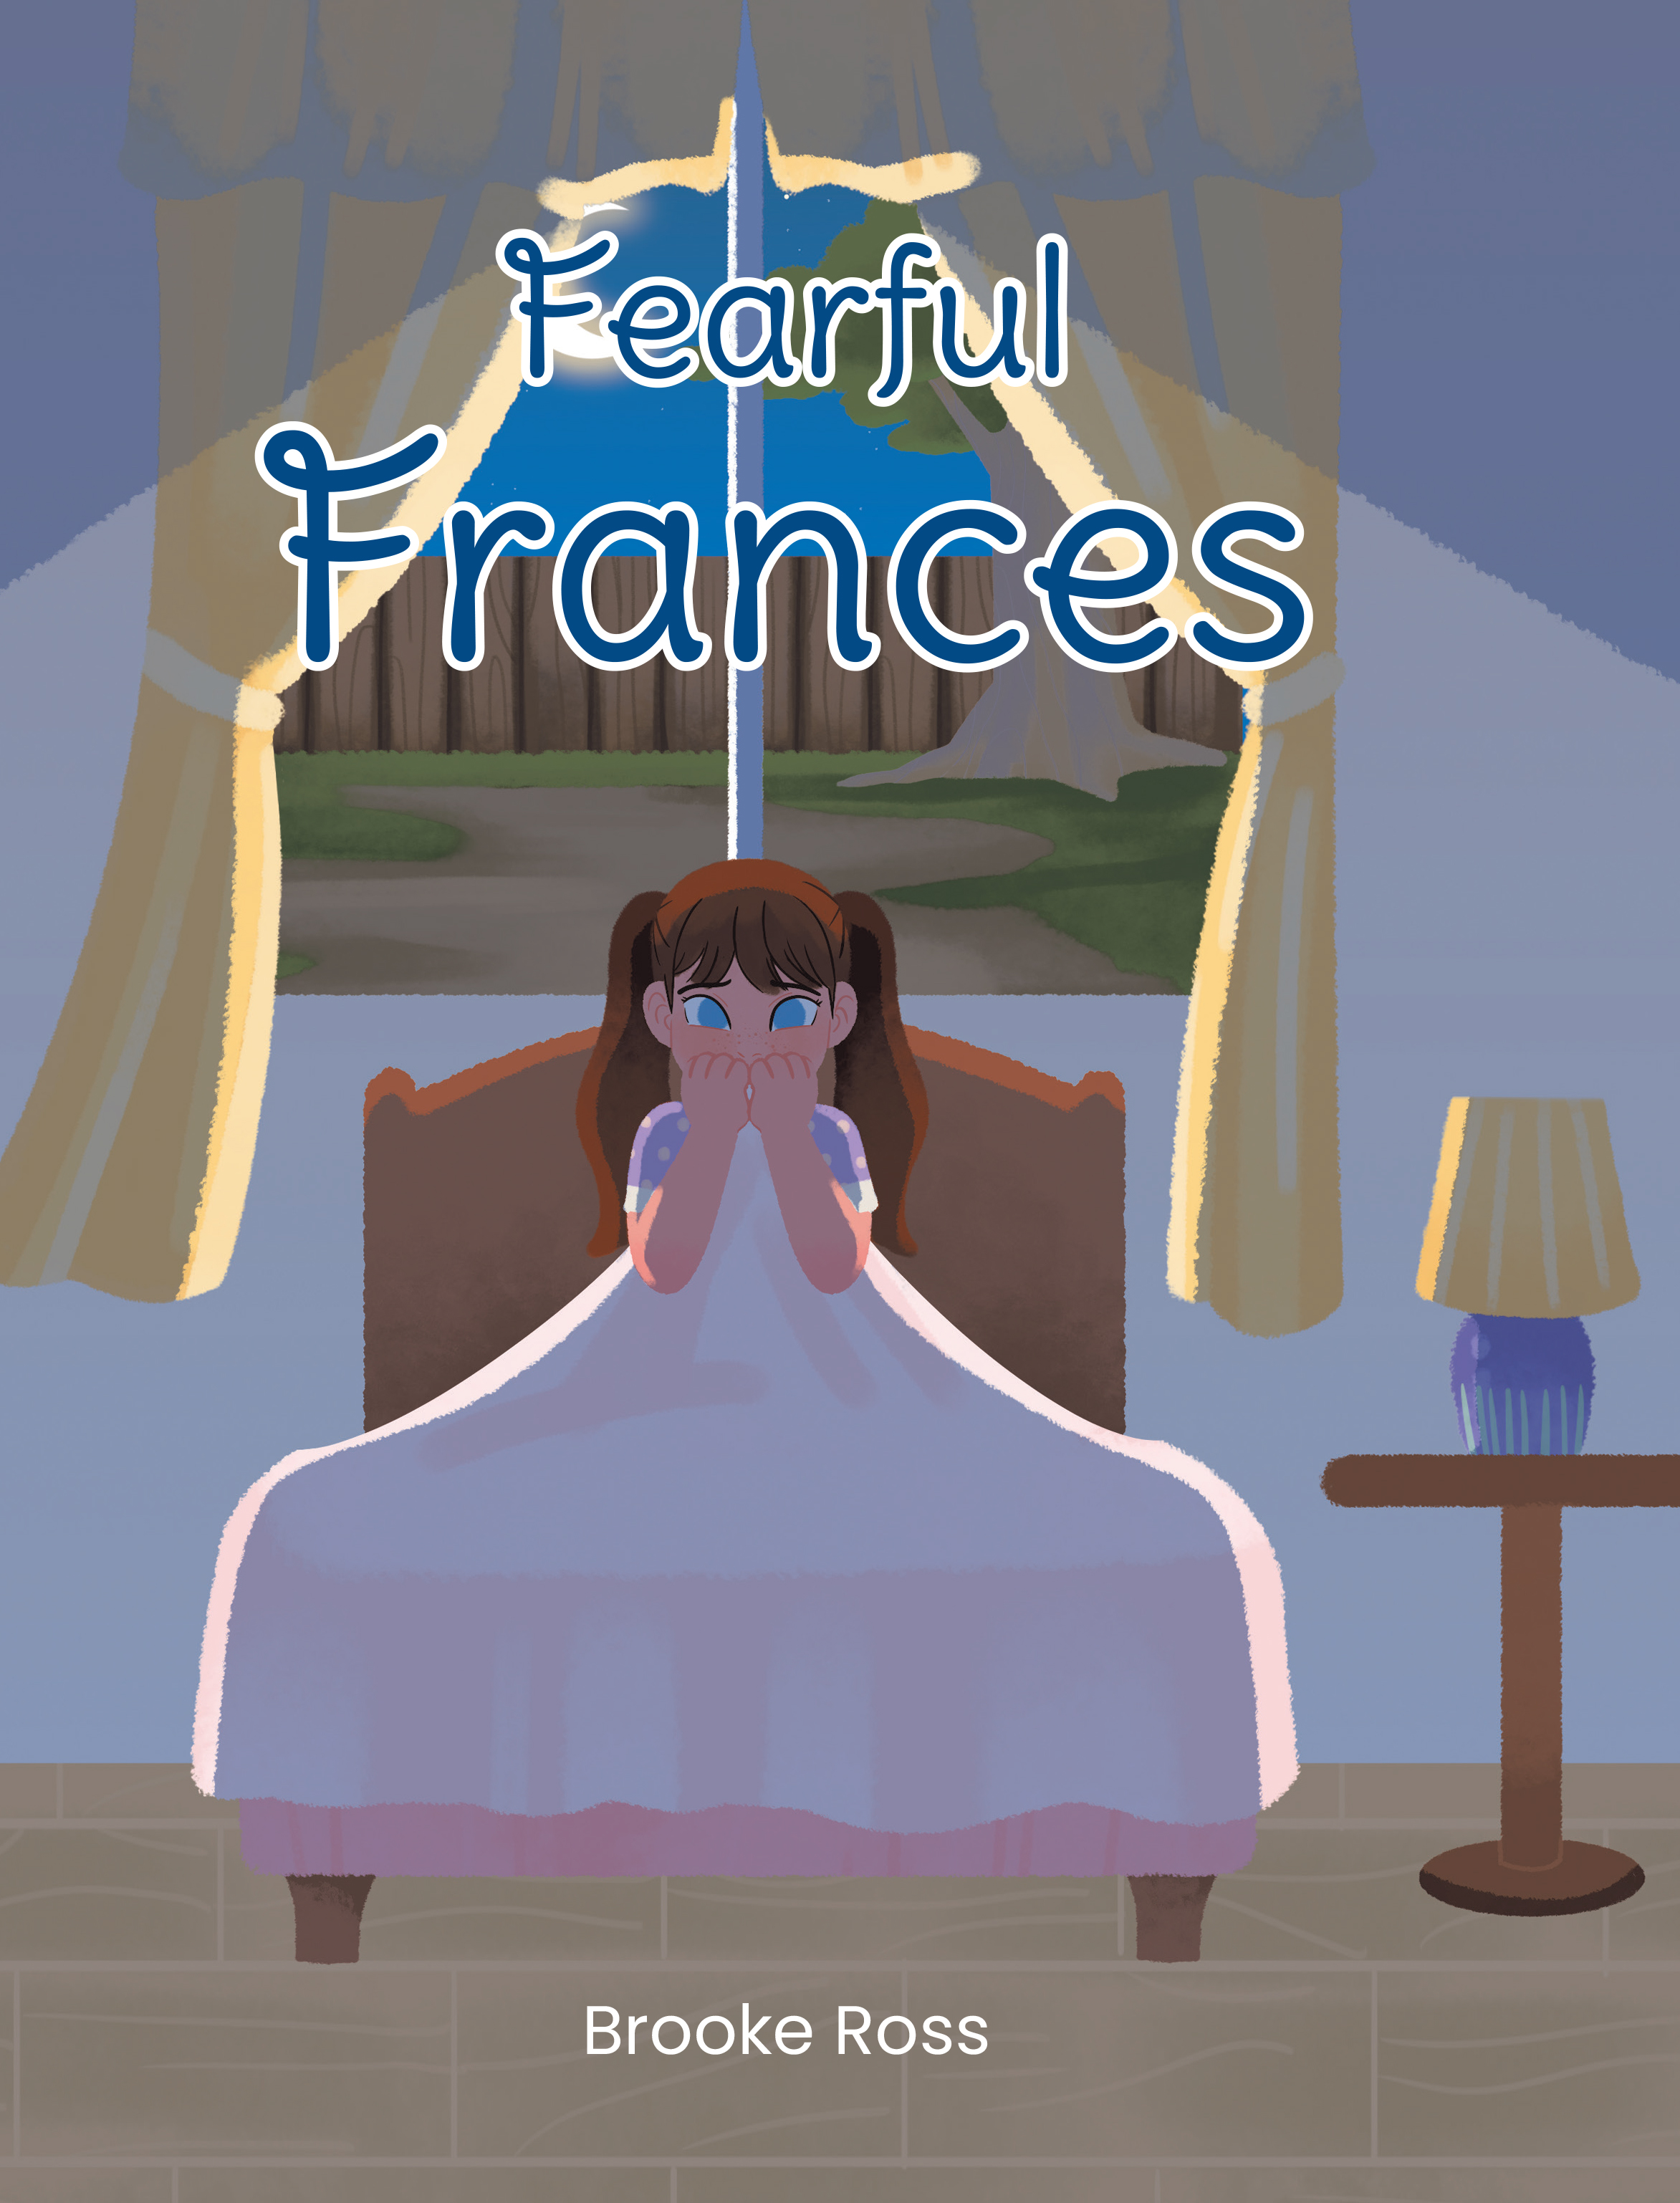 Brooke Ross’s Newly Released "Fearful Frances" is an Empowering Tale of Overcoming Fear